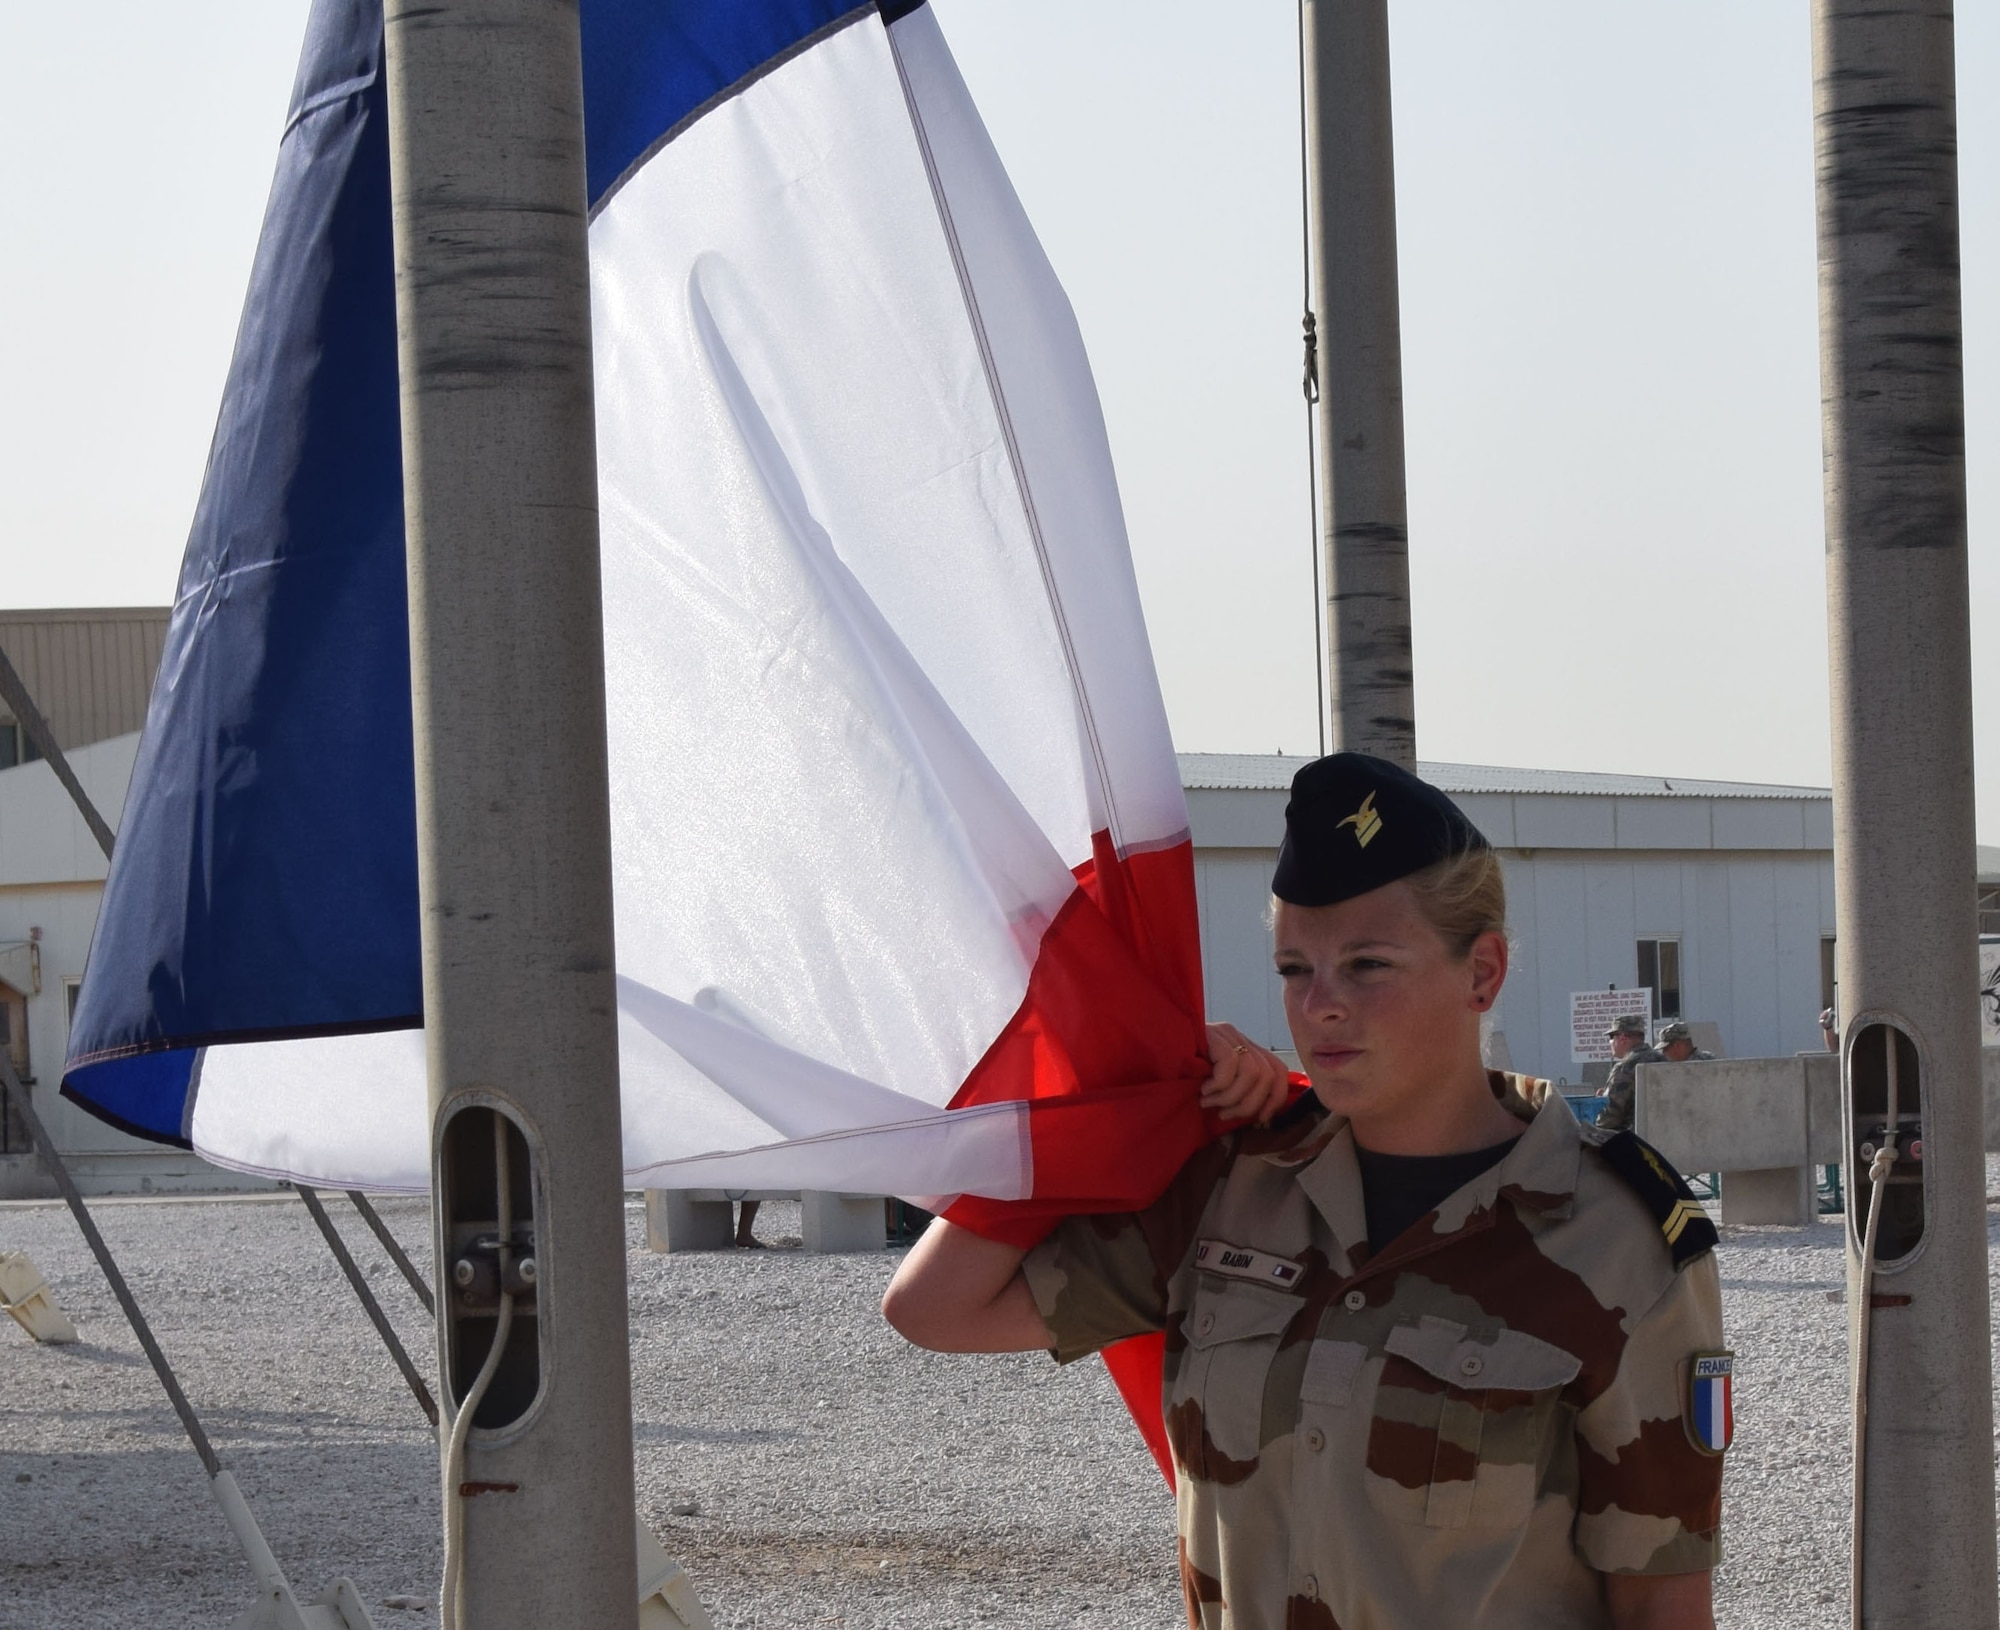 A member of the “garde d’honneur” from the French Air Force secures the French national flag, known as the Tricolour, before the Bastille Day ceremony July 14, 2016, at Al Udeid Air Base, Qatar. The French celebrate July 14 as Bastille Day to commemorate the storming of the royal jail called “la Bastille” in Paris at the beginning of the French Revolution in 1789. France is one of 20 nations supporting the air Coalition that provides decisive air and space power to combat Daesh and other terrorist organizations and ensure the stability of the Southwest Asia region. (U.S. Air Force photo/Carlos J. Treviño/Released))